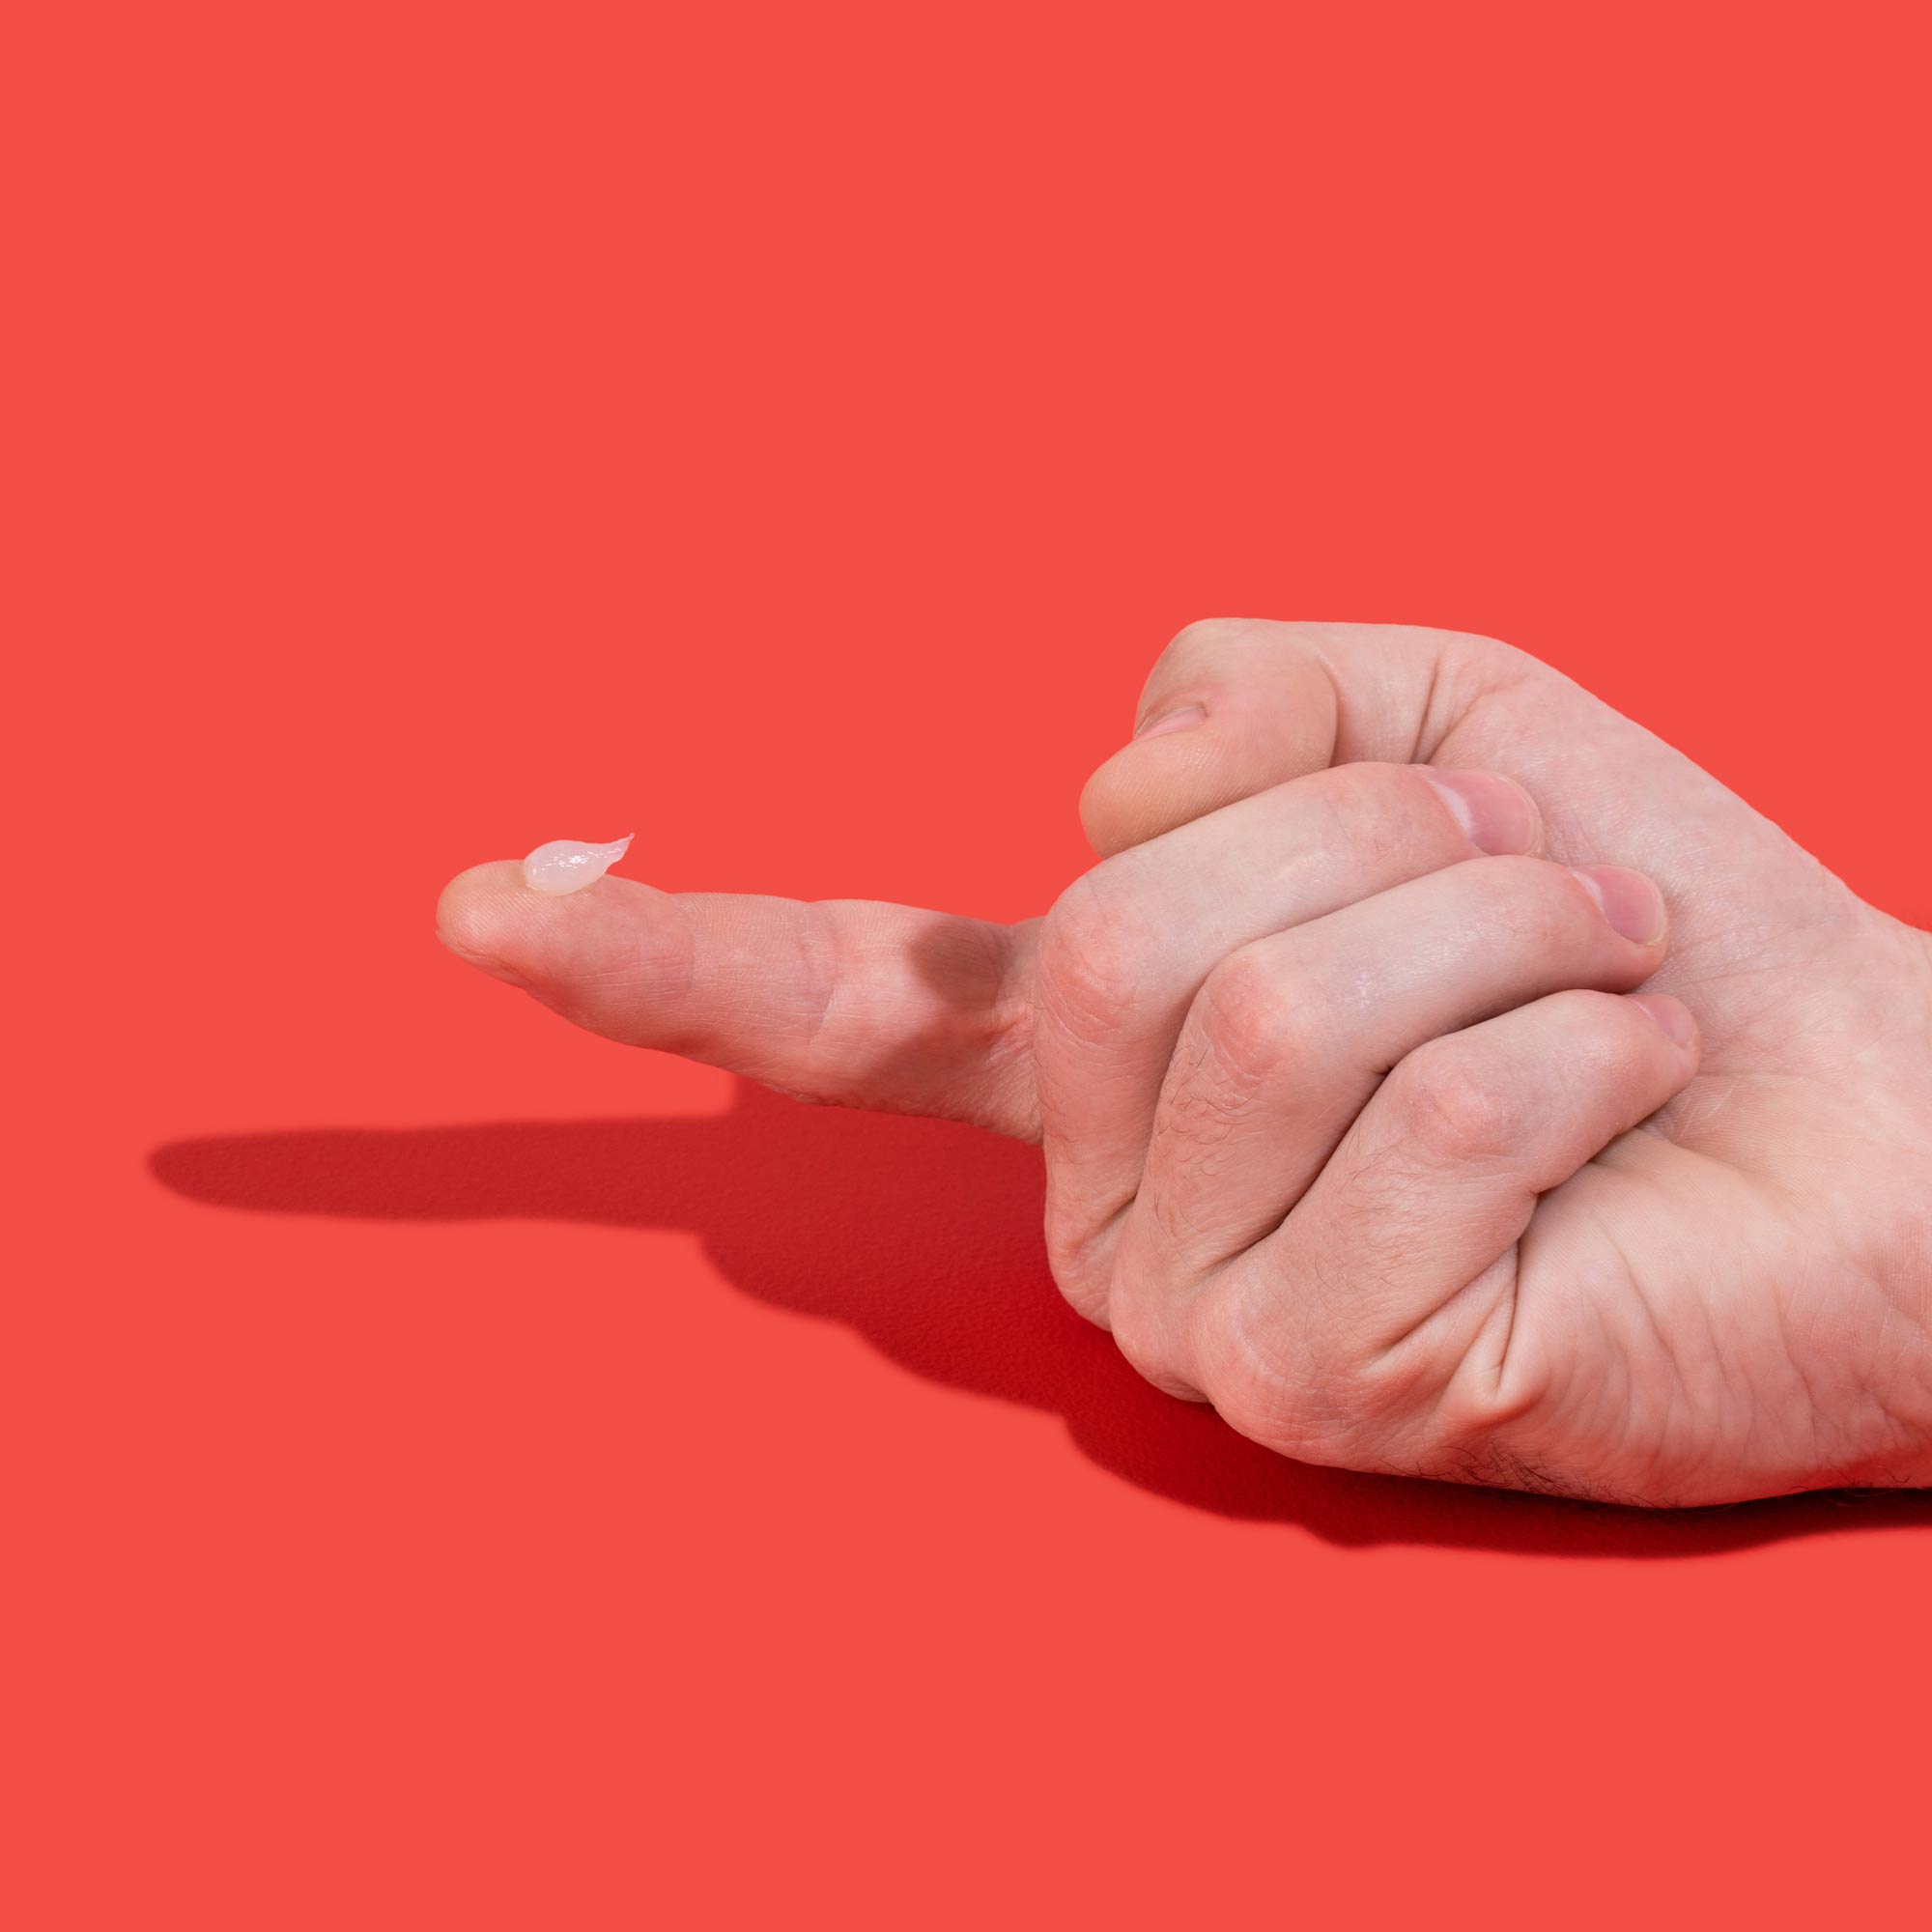 Hand with Acyclovir cream on index finger to treat oral and genital herpes on a red background